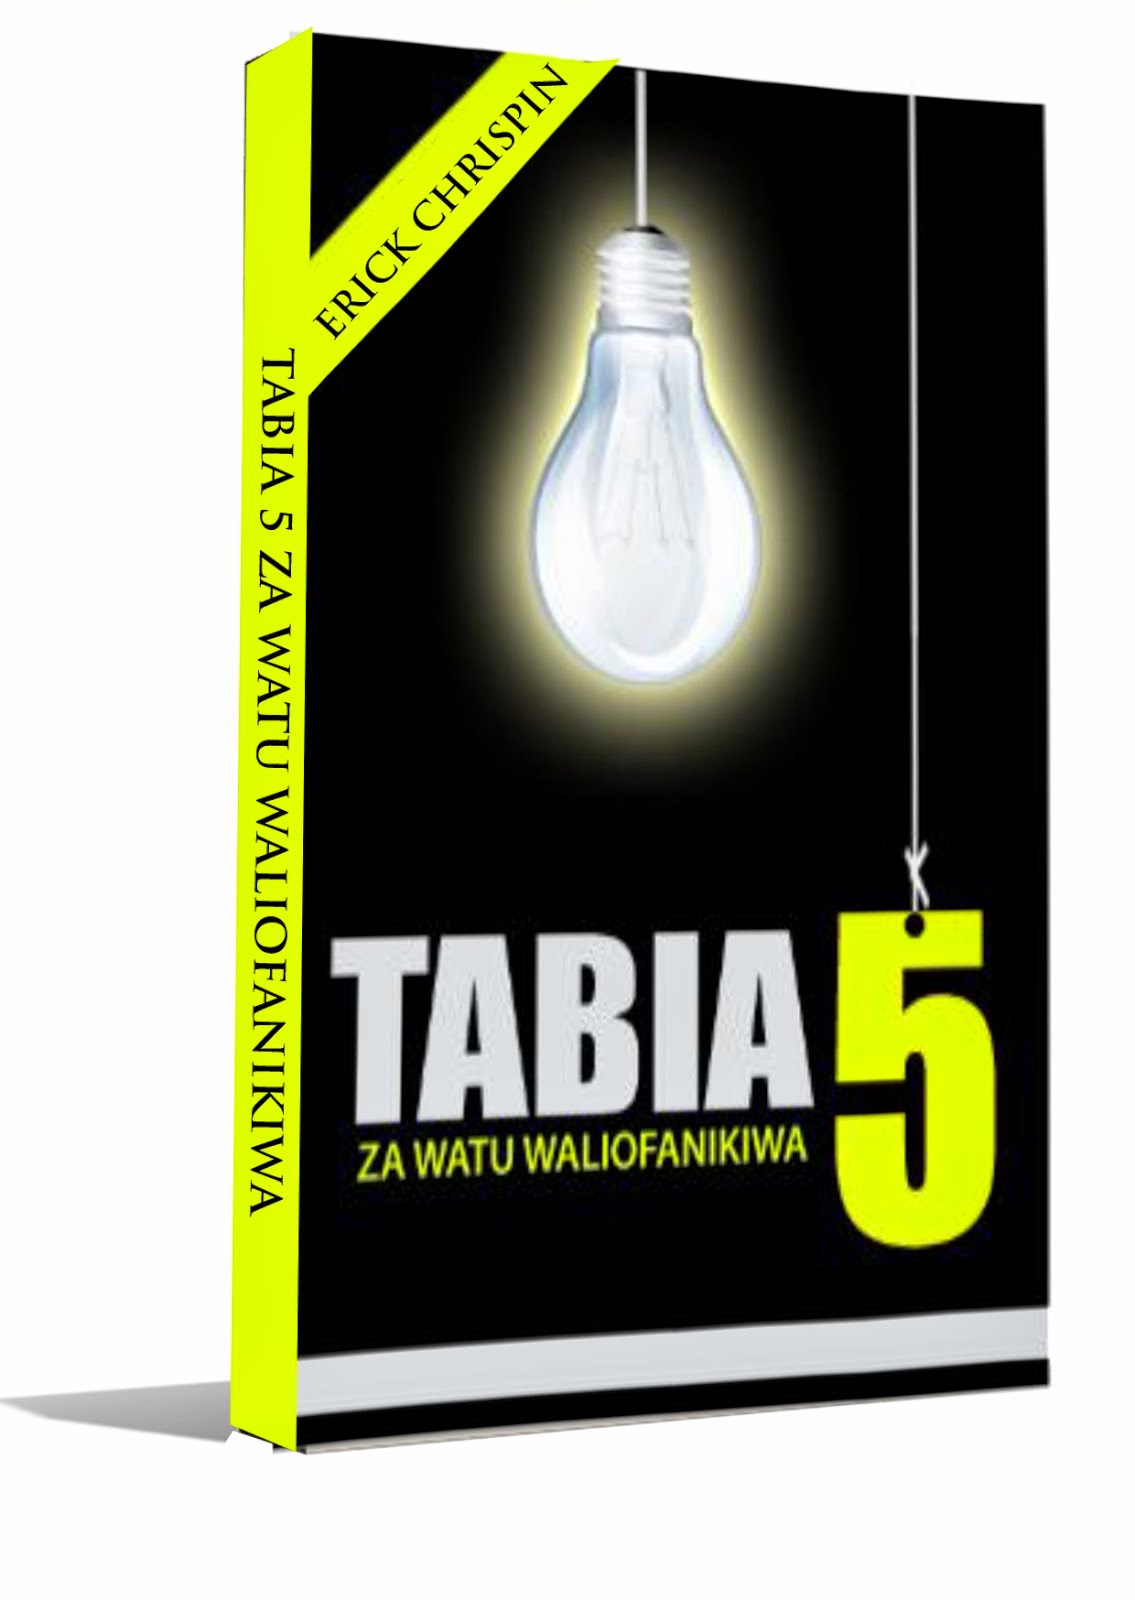 MY NEW SWAHILI BOOK IS IN THE MARKET NOW, BUY ONE FOR YOURSELF